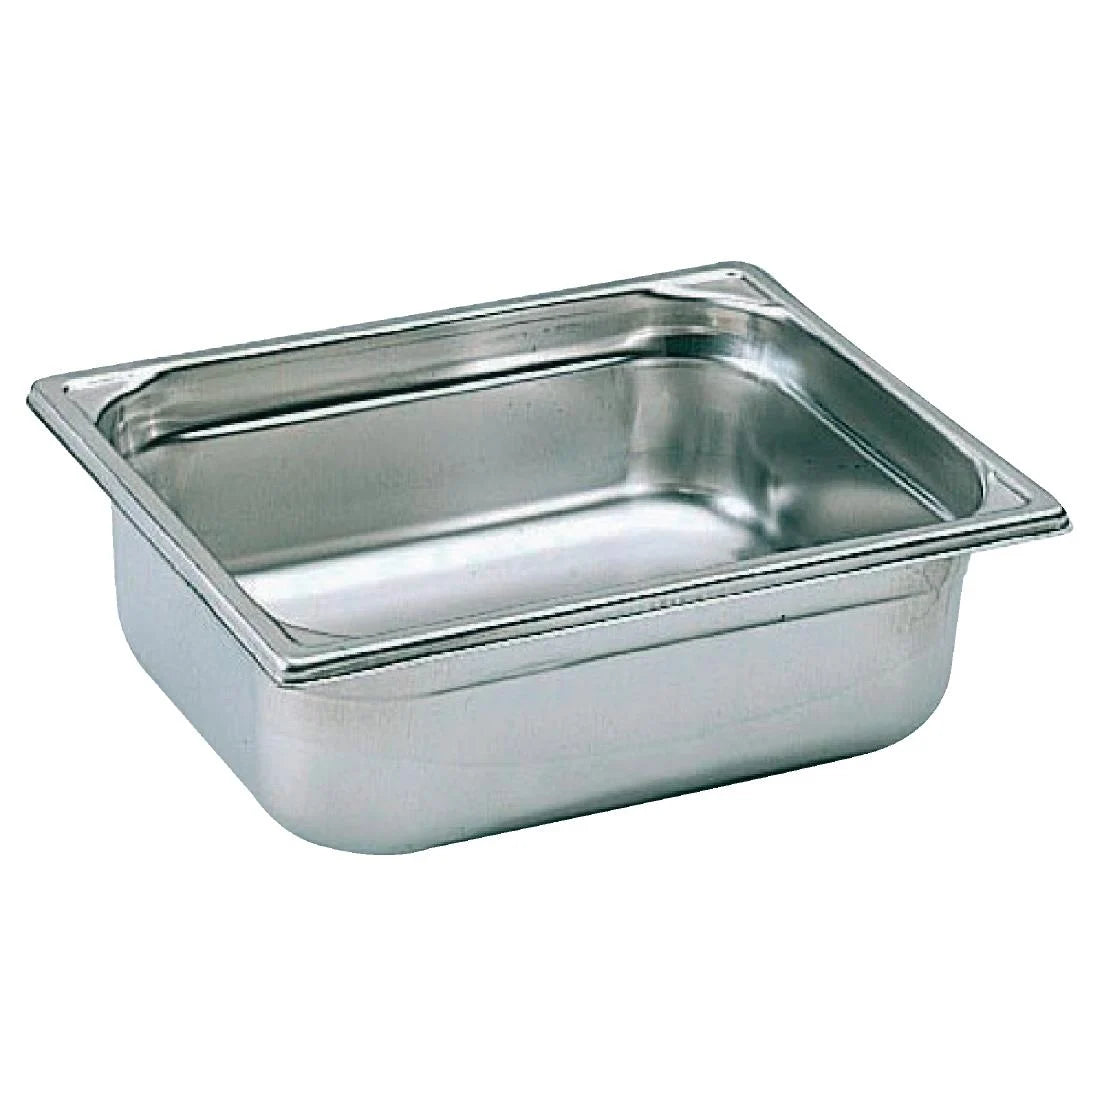 Bourgeat Stainless Steel 1/2 Gastronorm Pan 100mm JD Catering Equipment Solutions Ltd